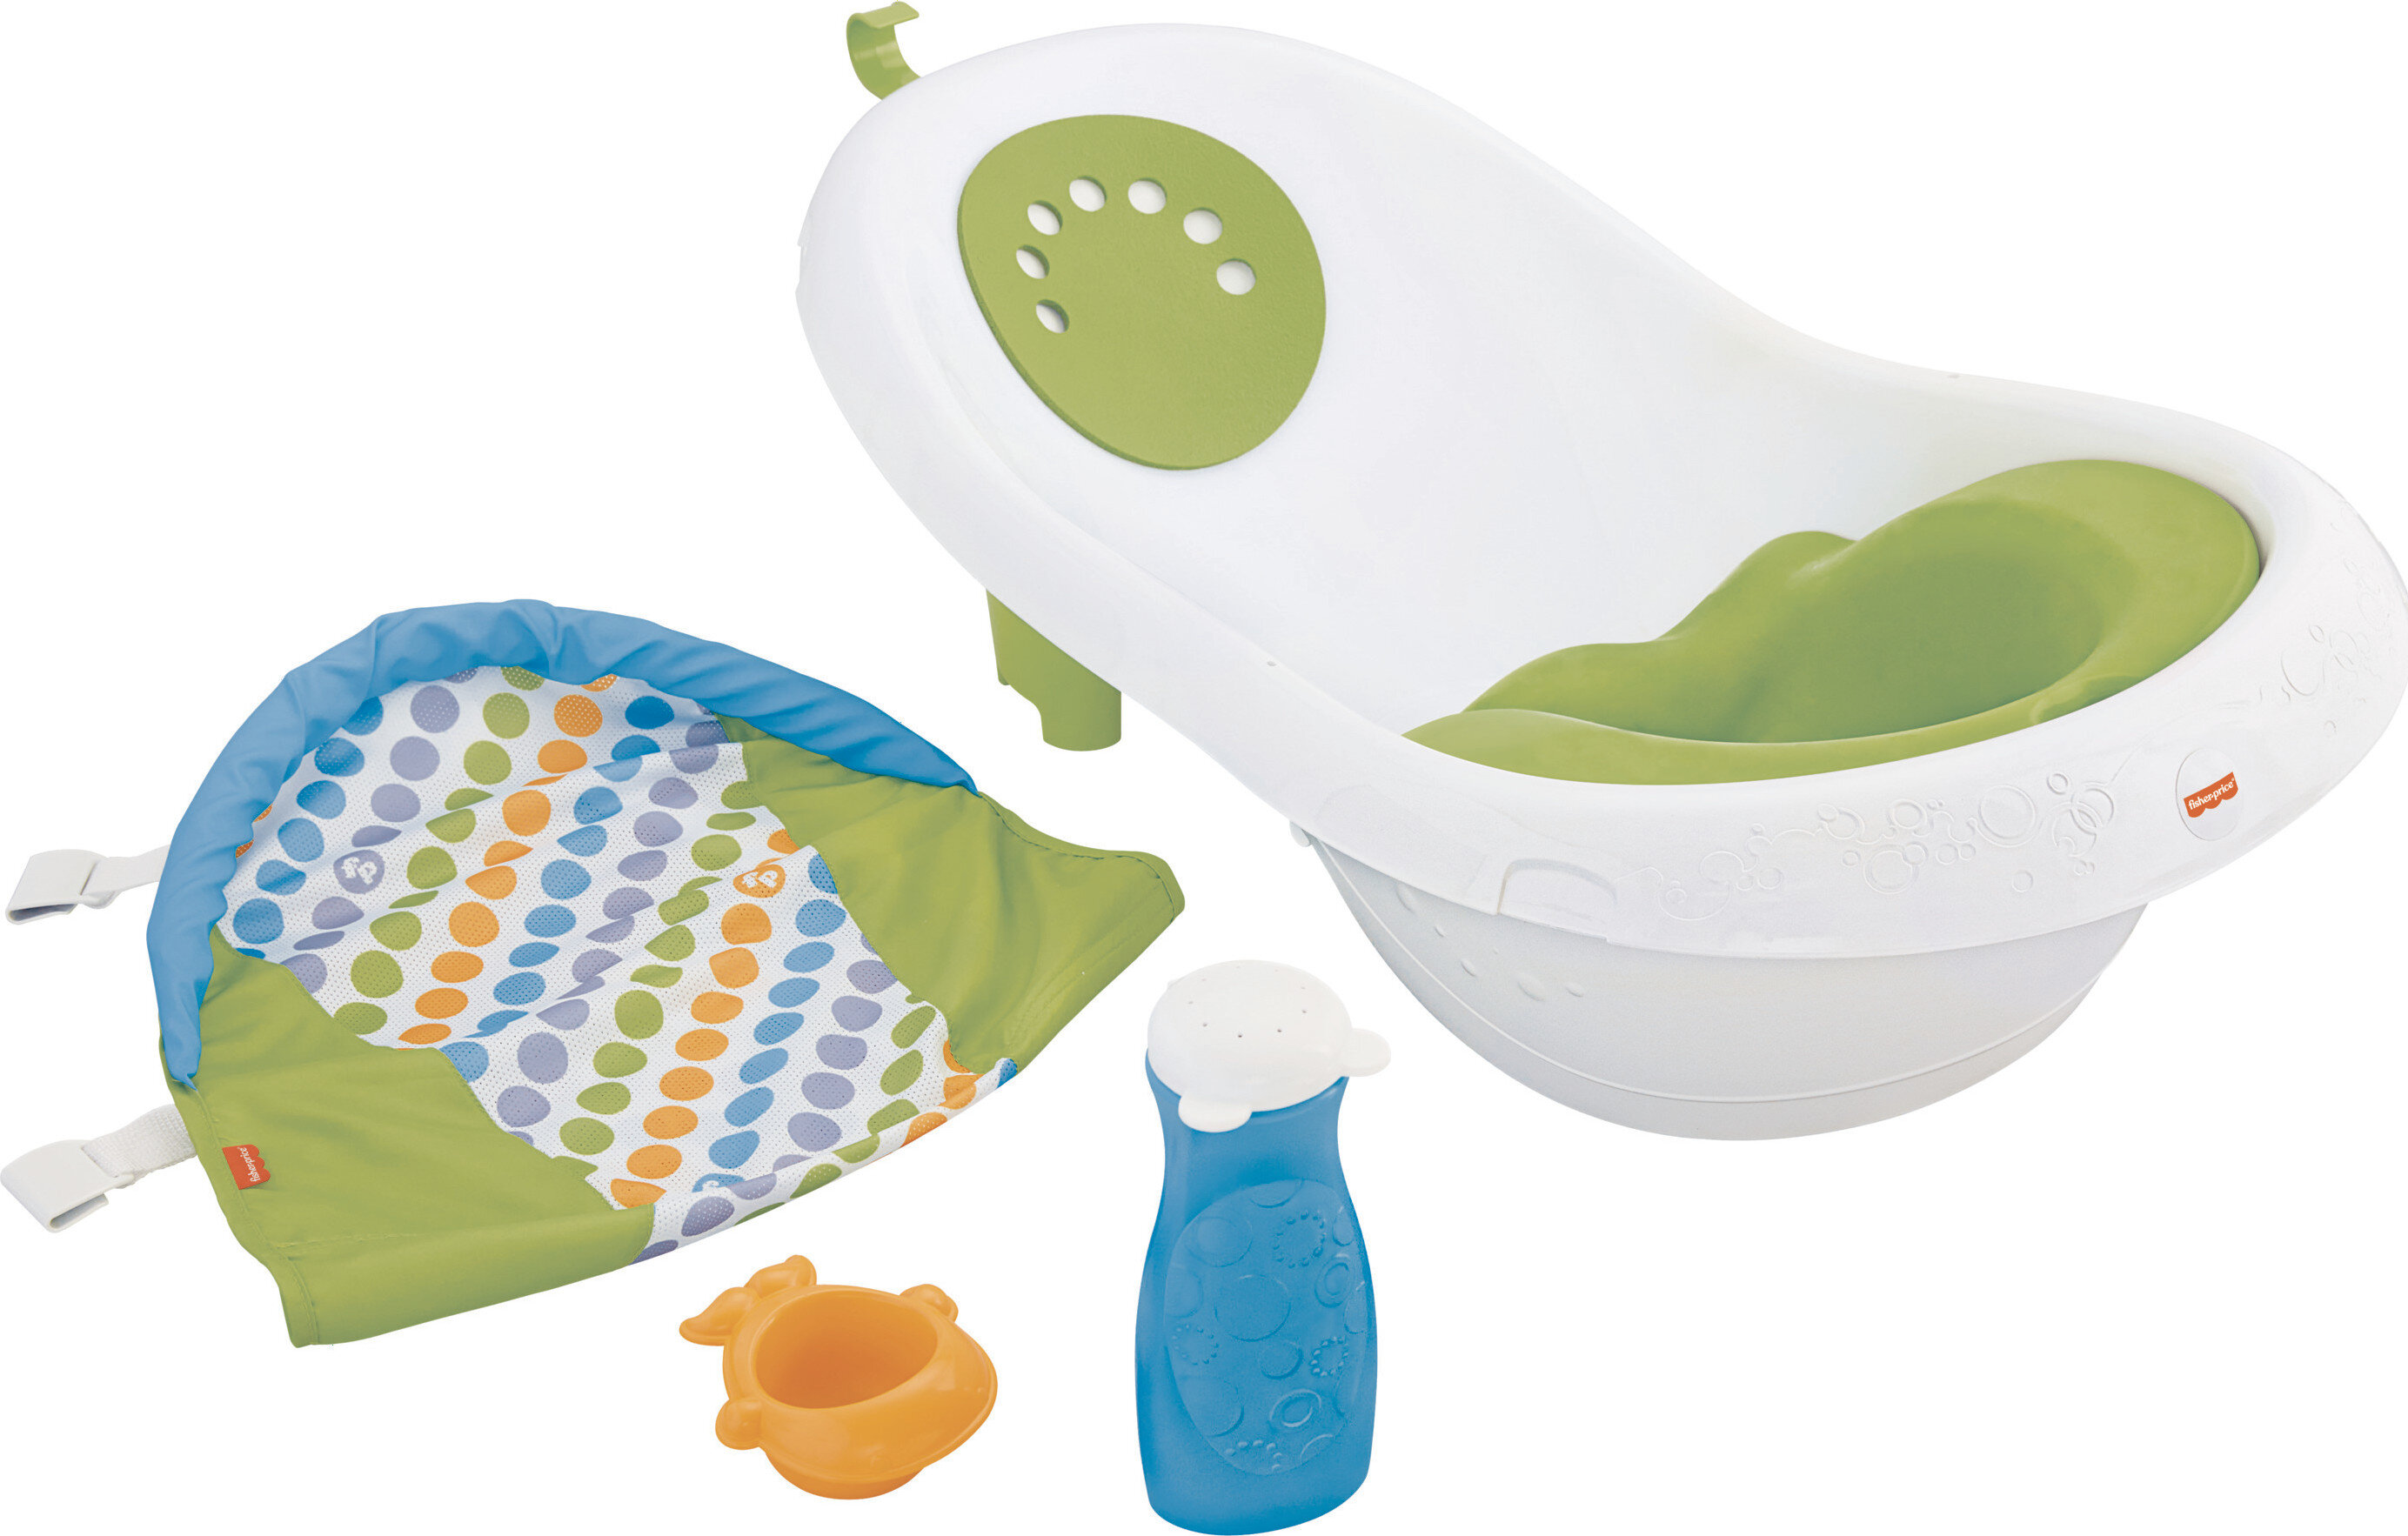 Fisher-Price 4-in-1 Sling ‘n Seat Tub Adjustable Baby Bath for Infant to Toddler with 2 Toys, Unisex - image 5 of 7